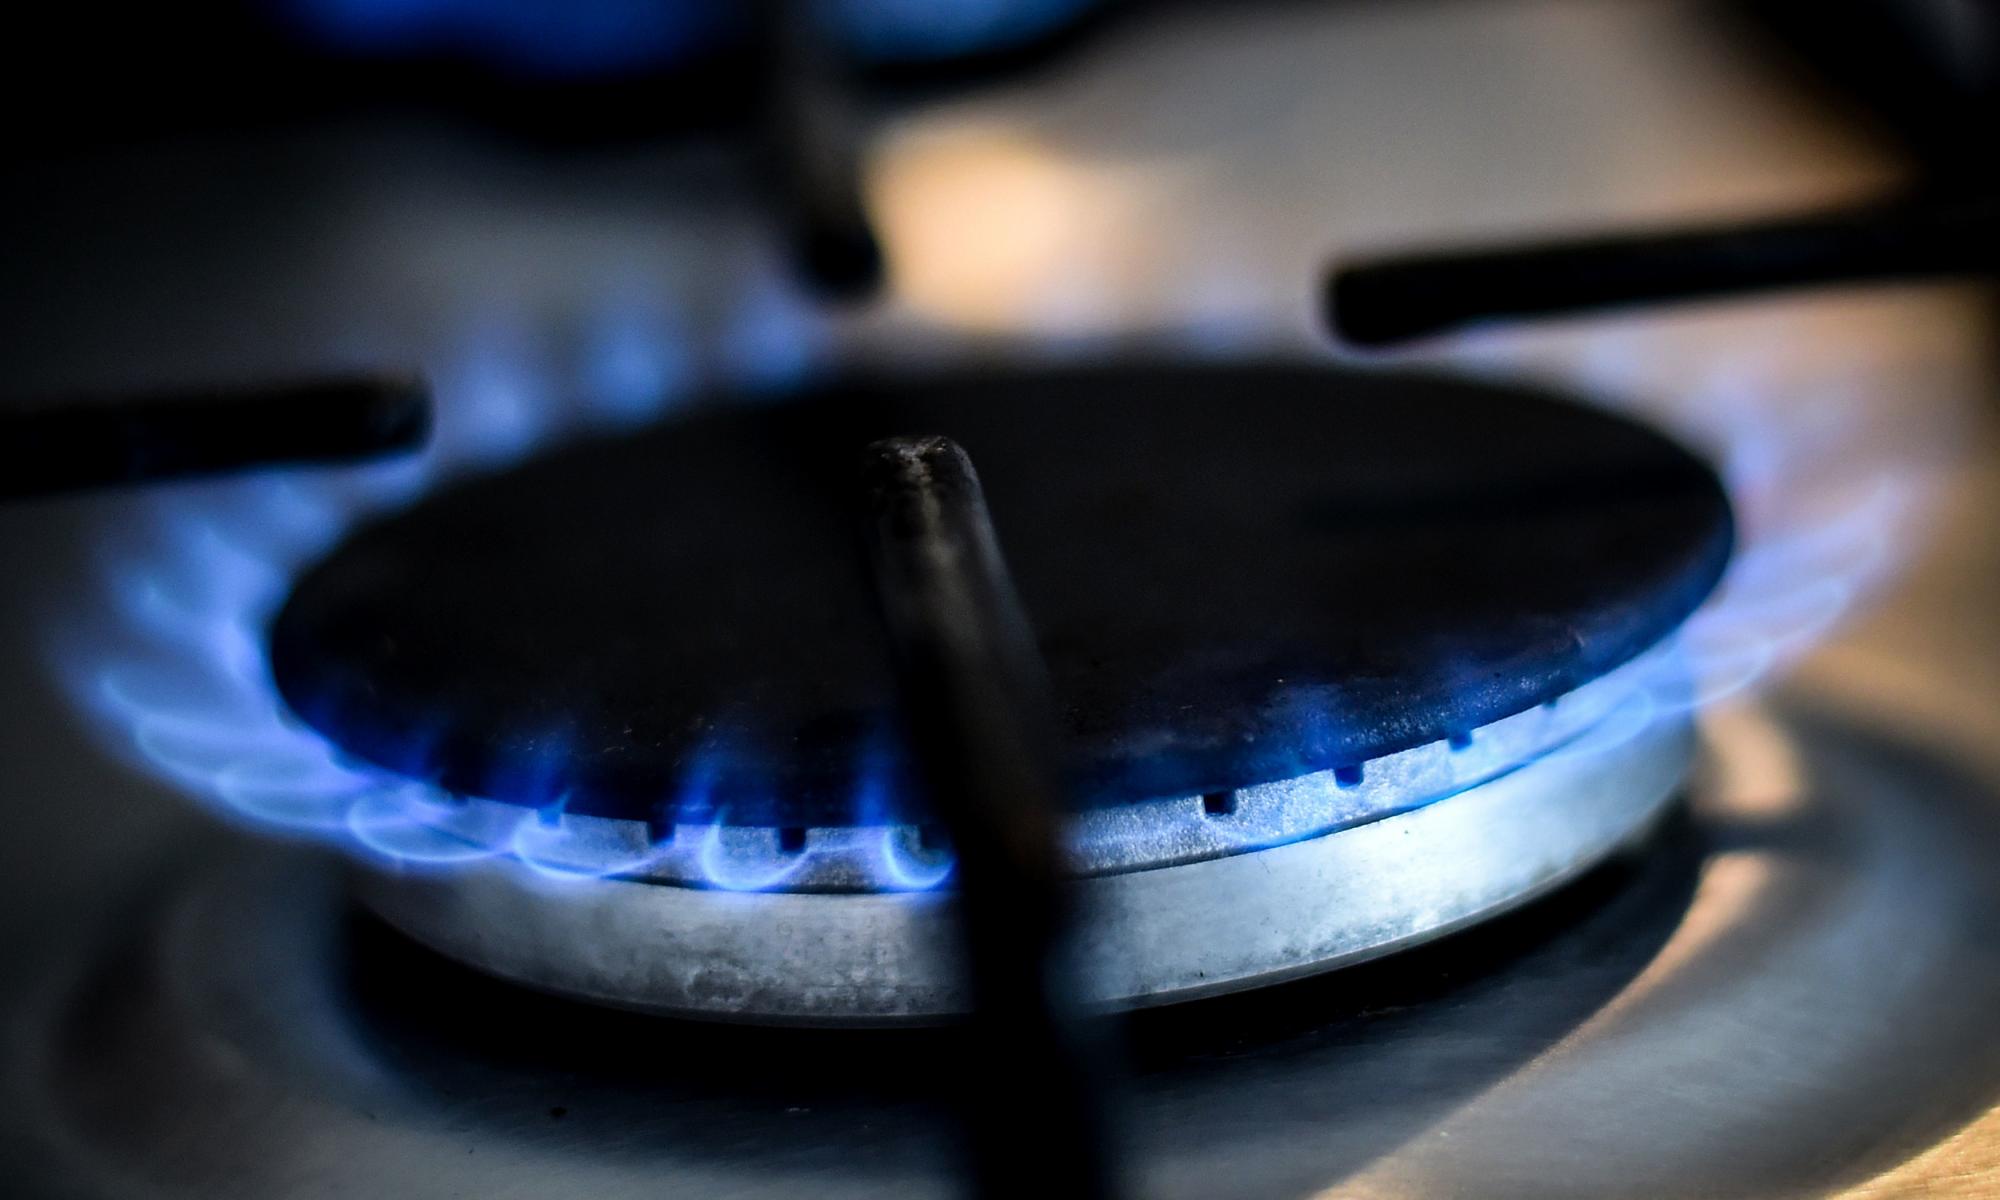 6m UK homes may be unable to pay energy bills after price hike, charity warns